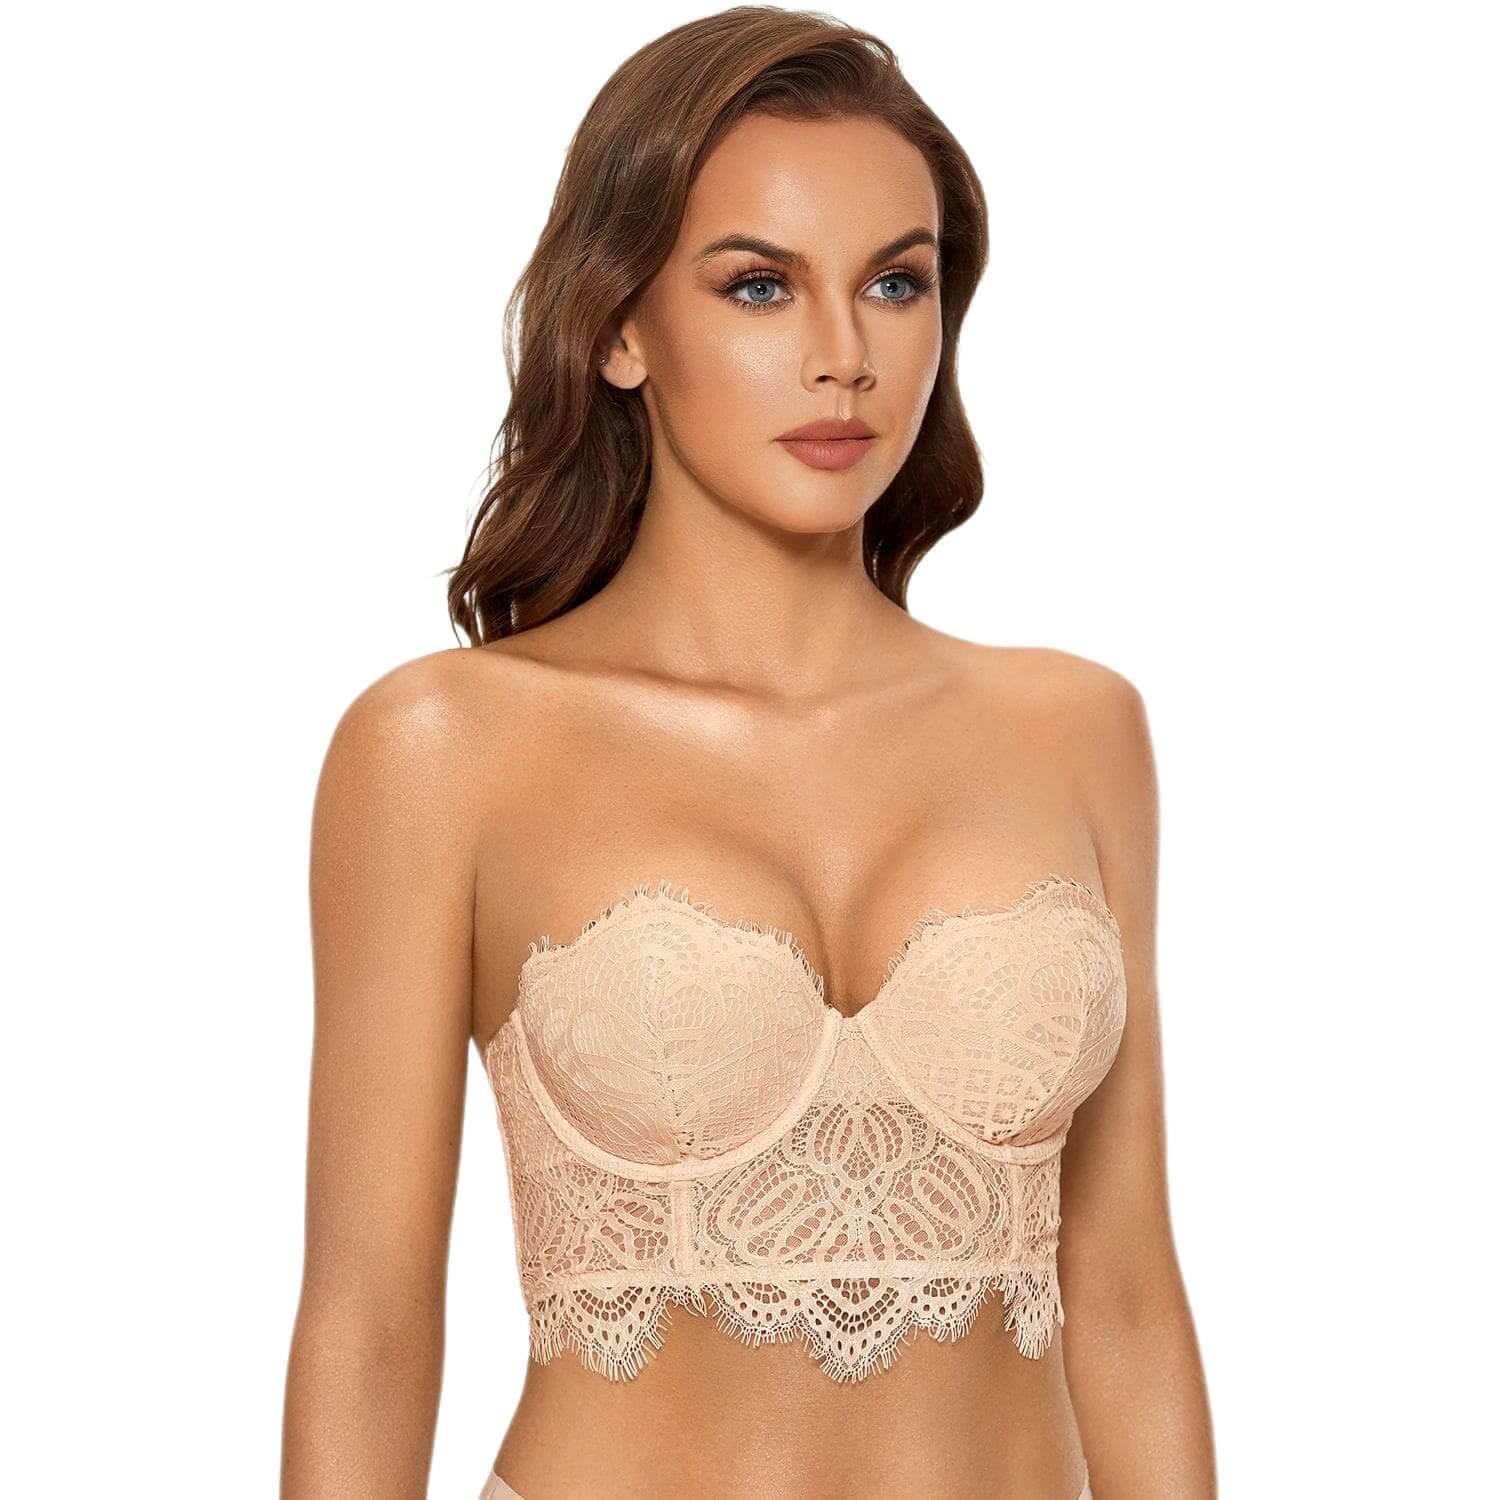 Pin by Laurie Mathew on styles I like  Best strapless bra, Strapless bra,  Style me